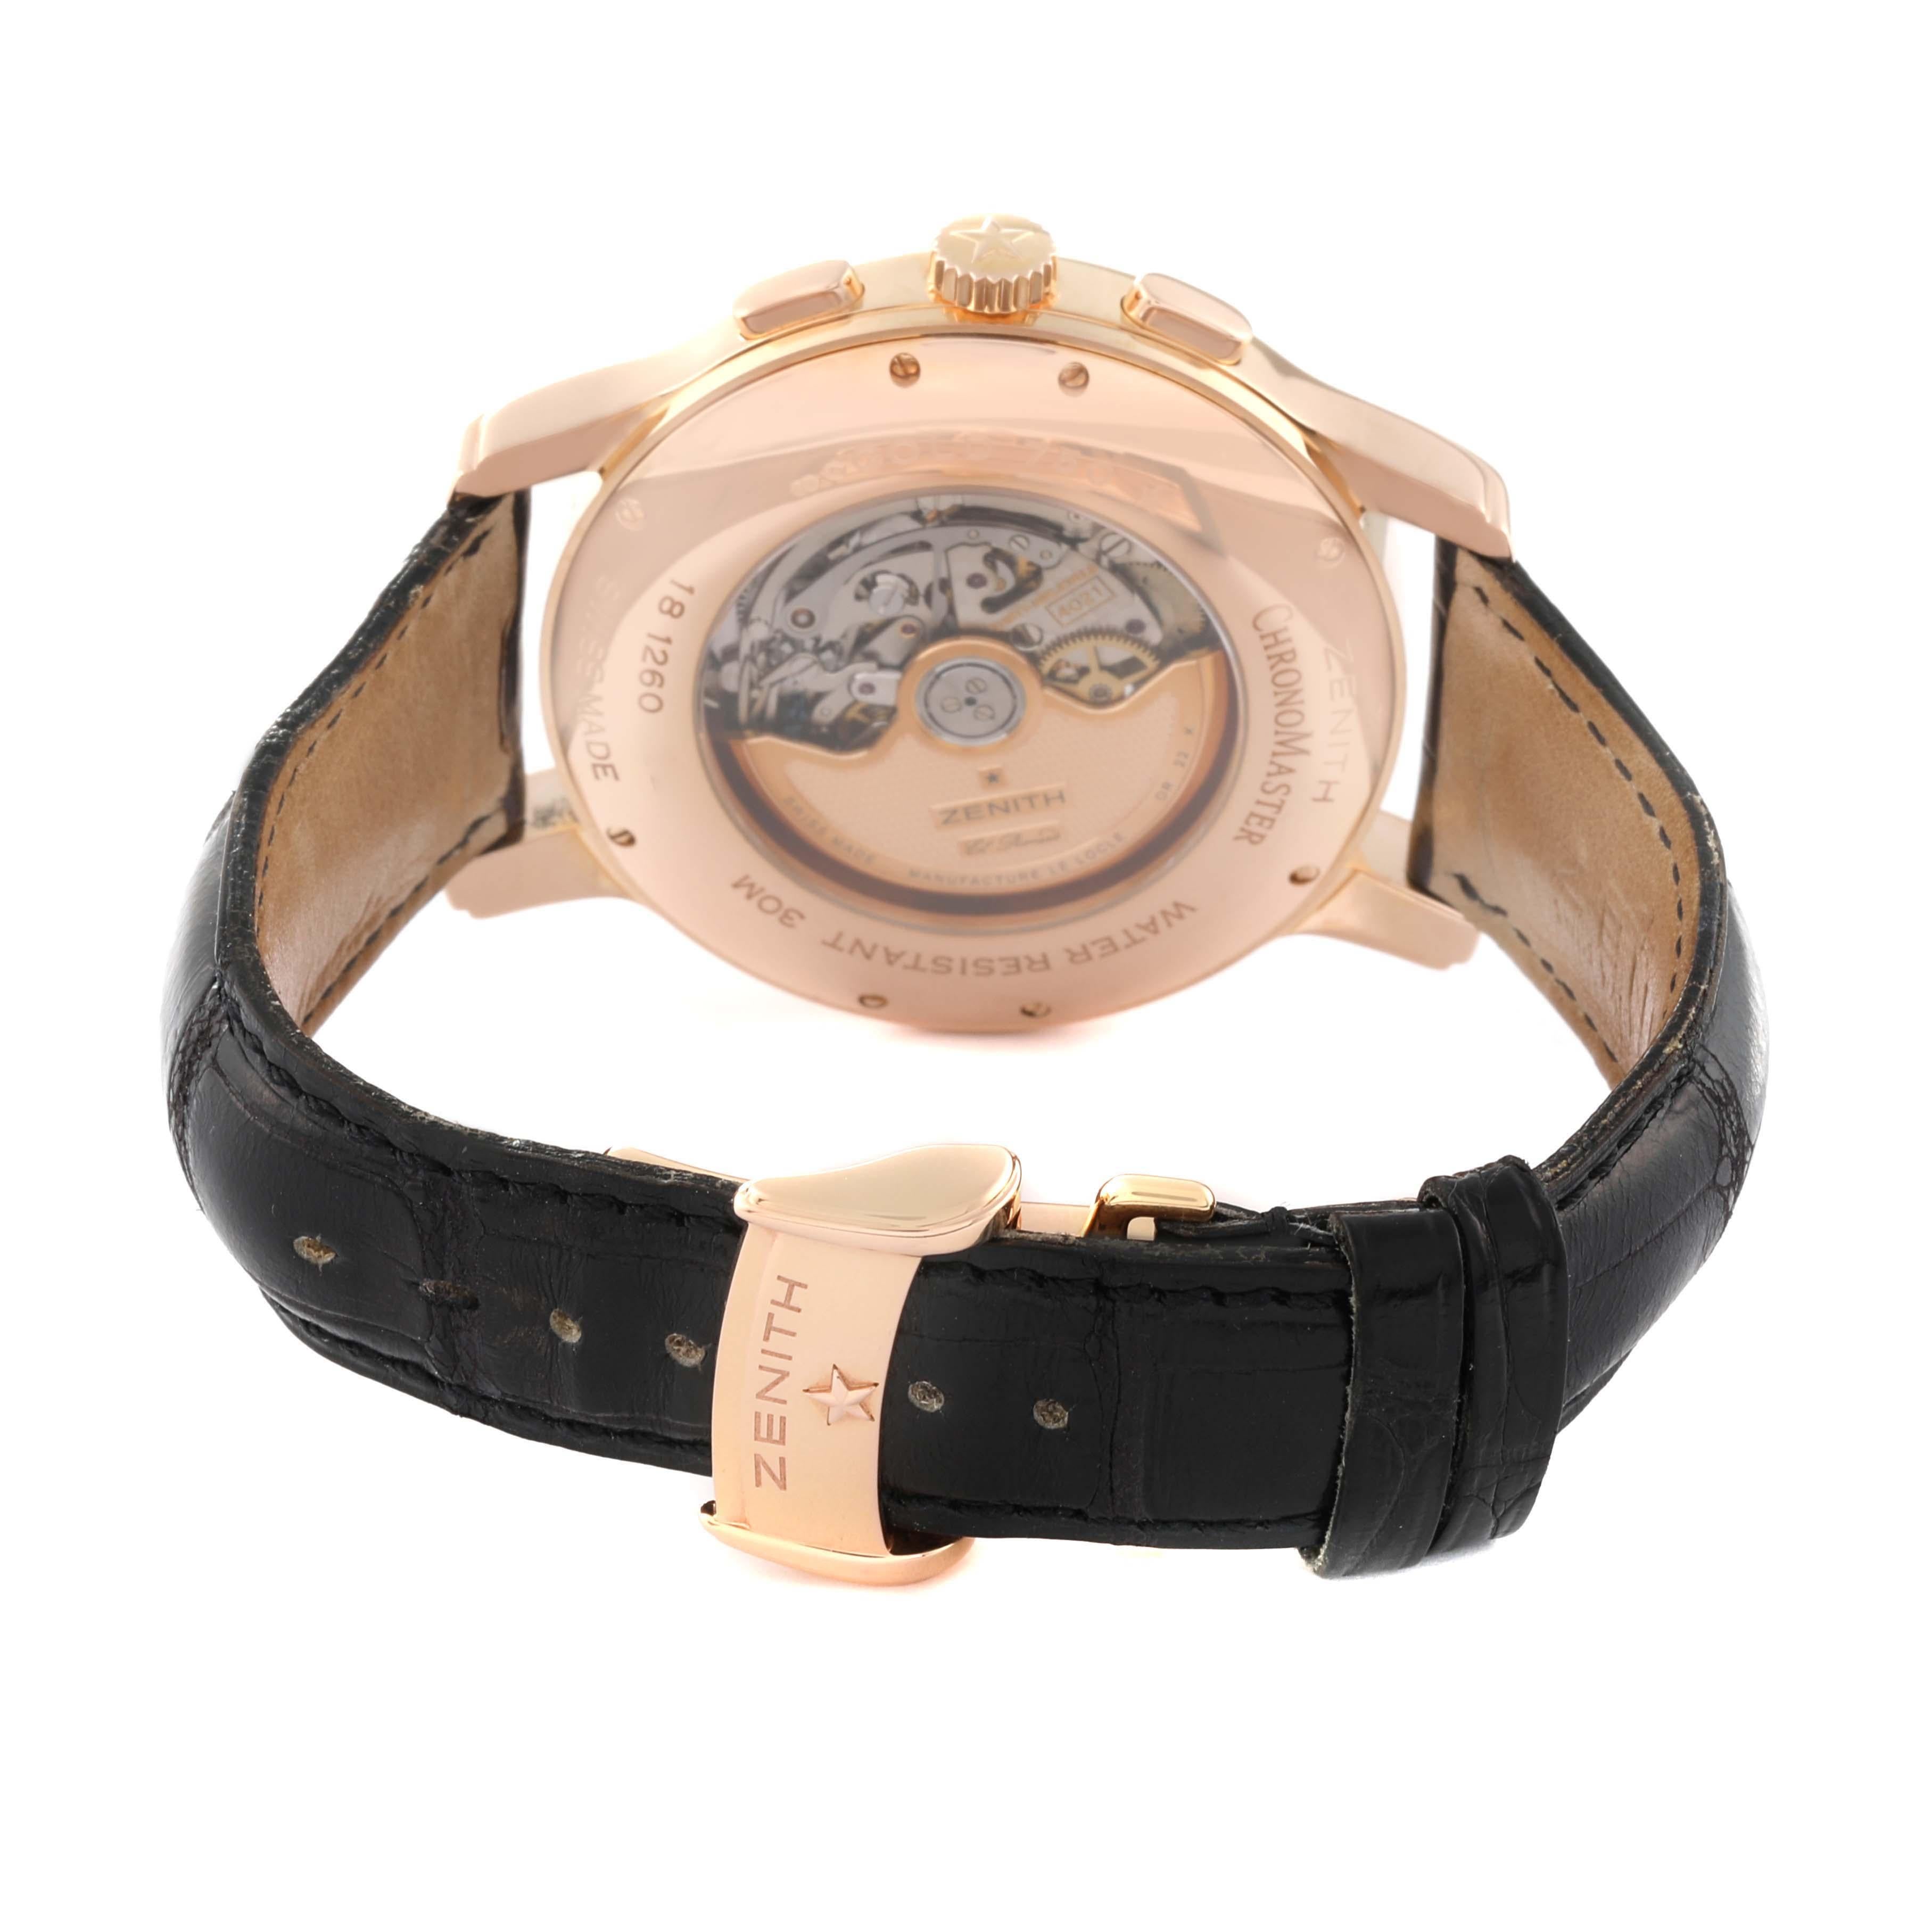 Zenith Chronomaster XXT Open Rose Gold Mens Watch 18.1260.4021 Box Papers For Sale 2